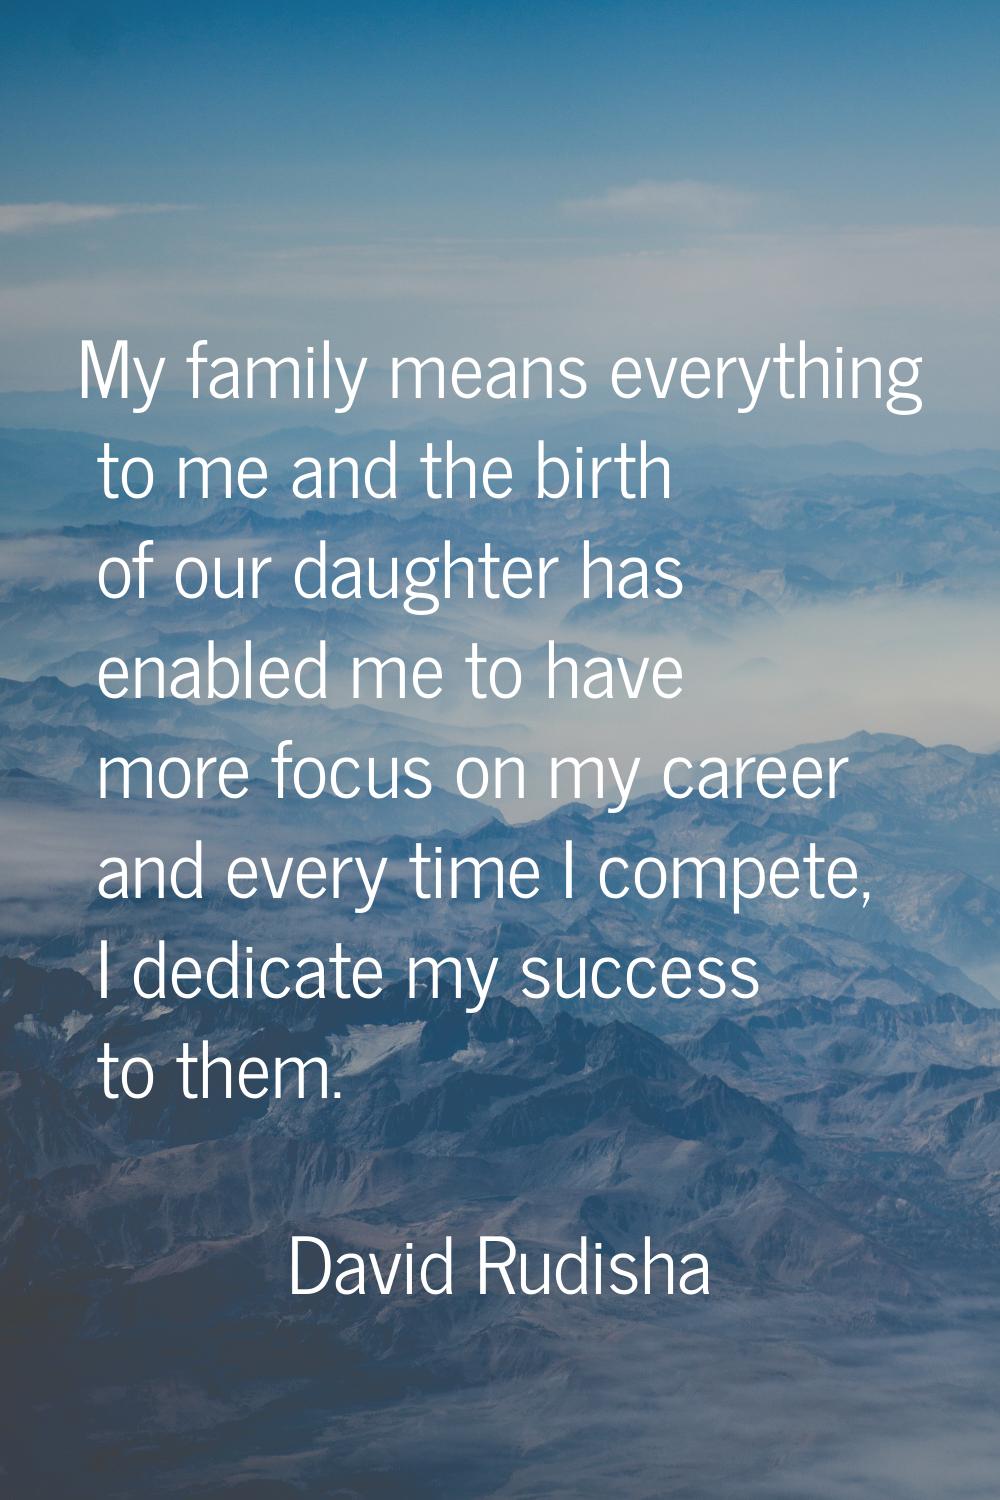 My family means everything to me and the birth of our daughter has enabled me to have more focus on